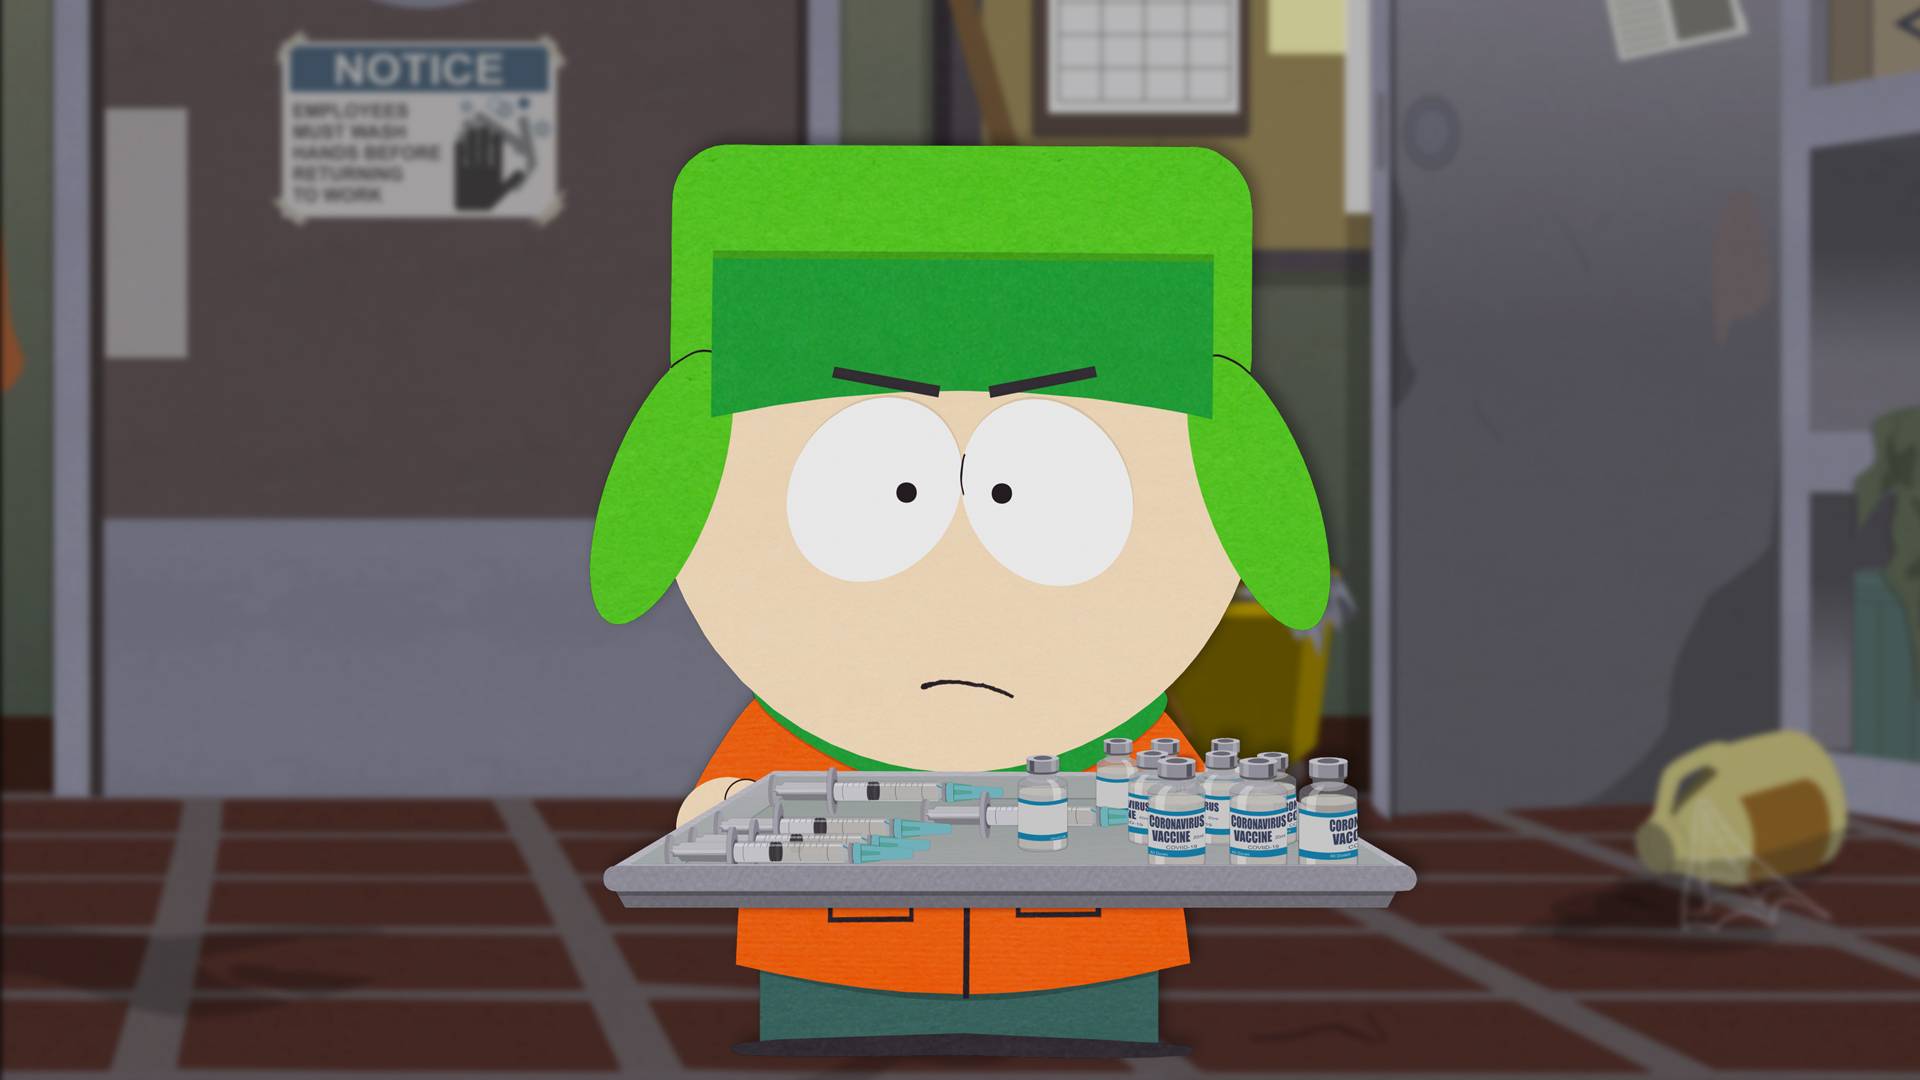 South Park: The Streaming Wars' Due on Blu-ray and DVD Nov. 7